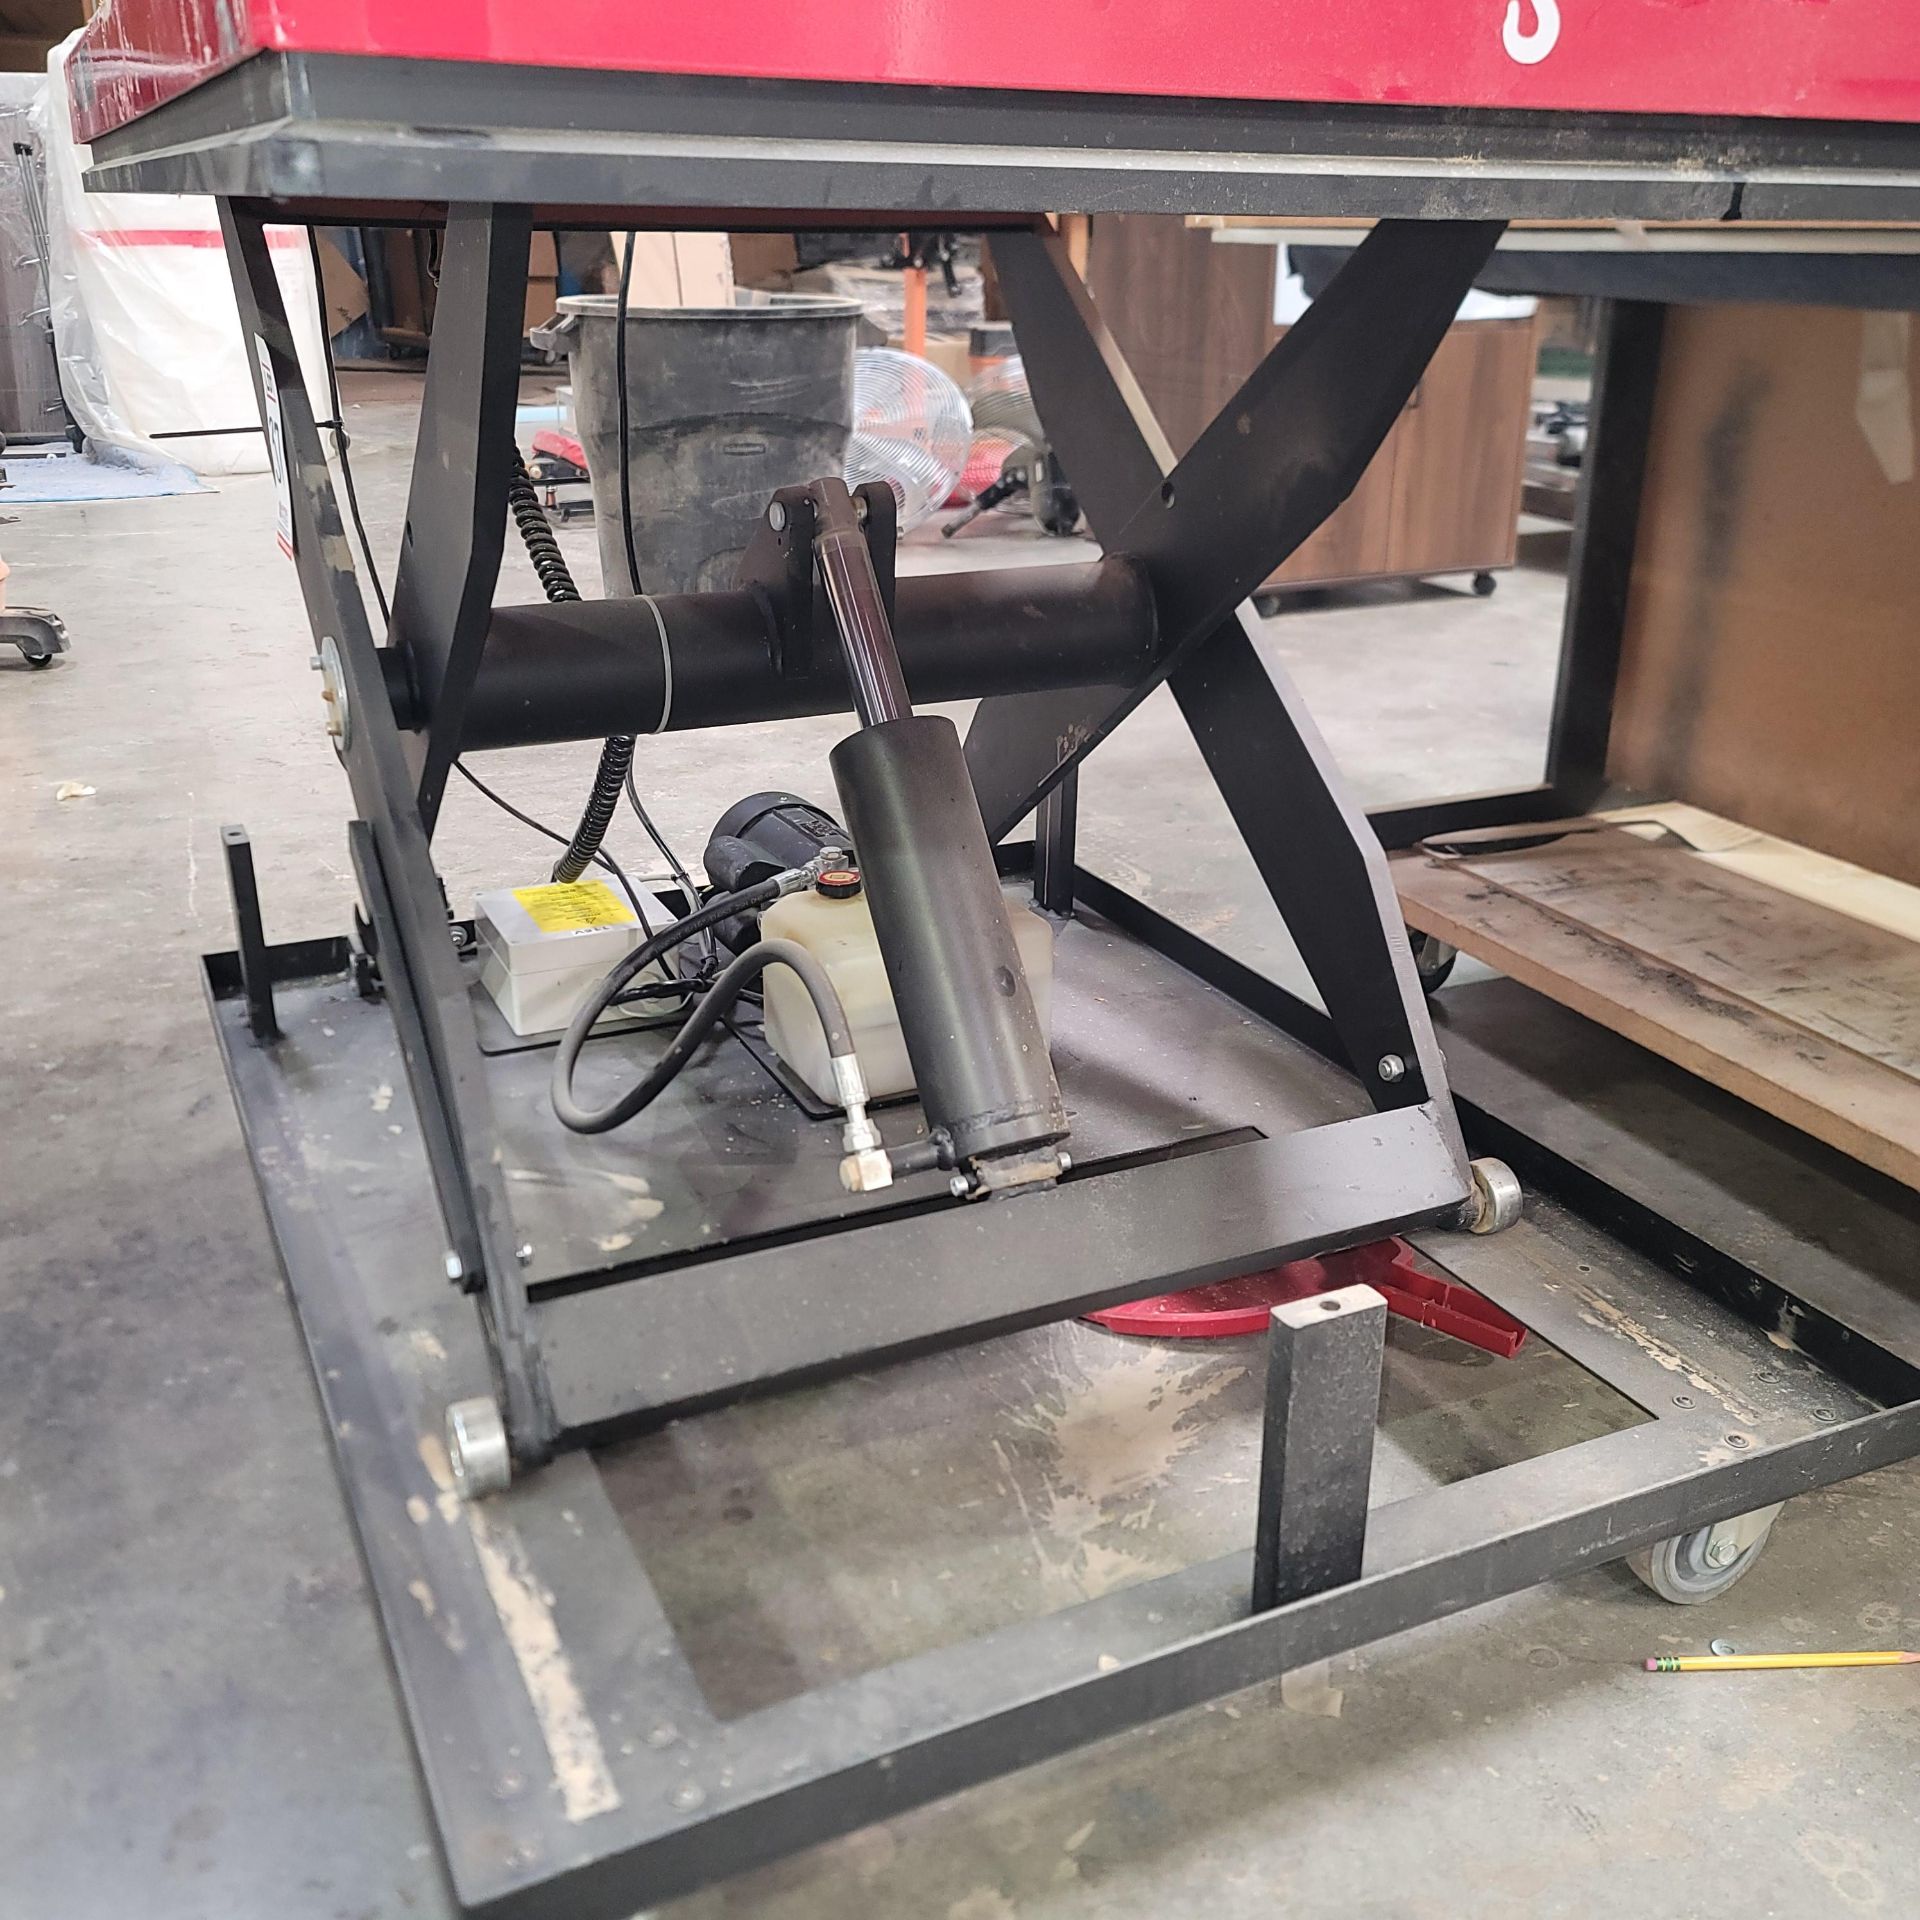 SCISSOR LIFT TABLE, 4' X 3', 2,000 LB CAPACITY, ON CASTERS - Image 4 of 4